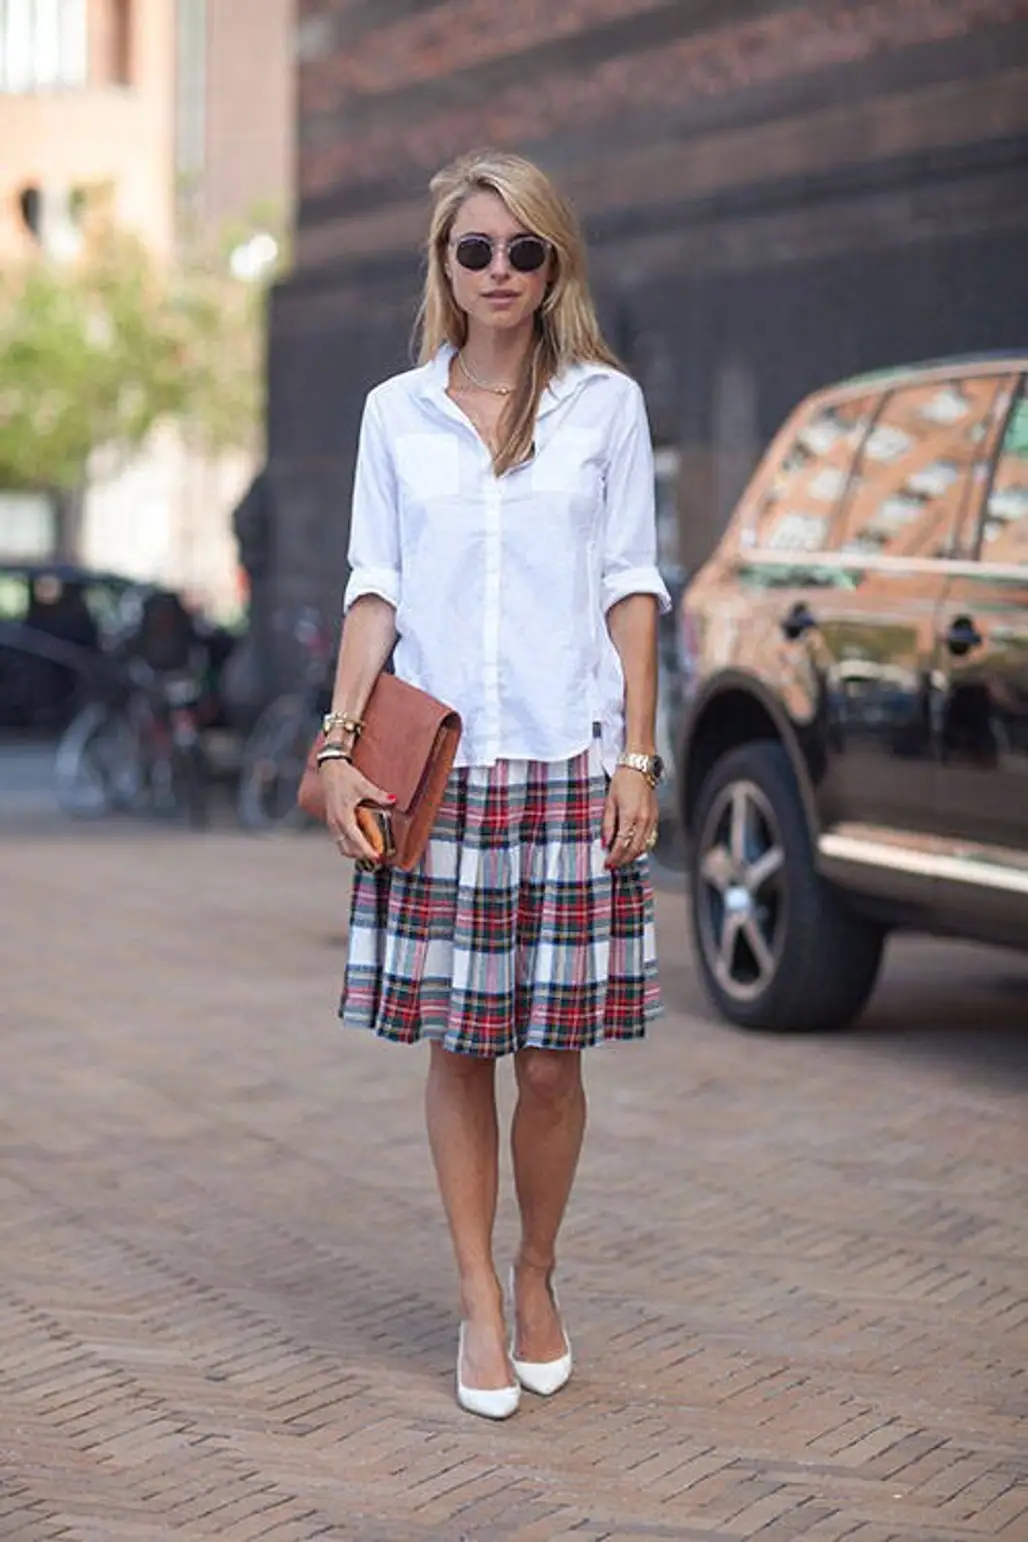 With a Plaid Skirt